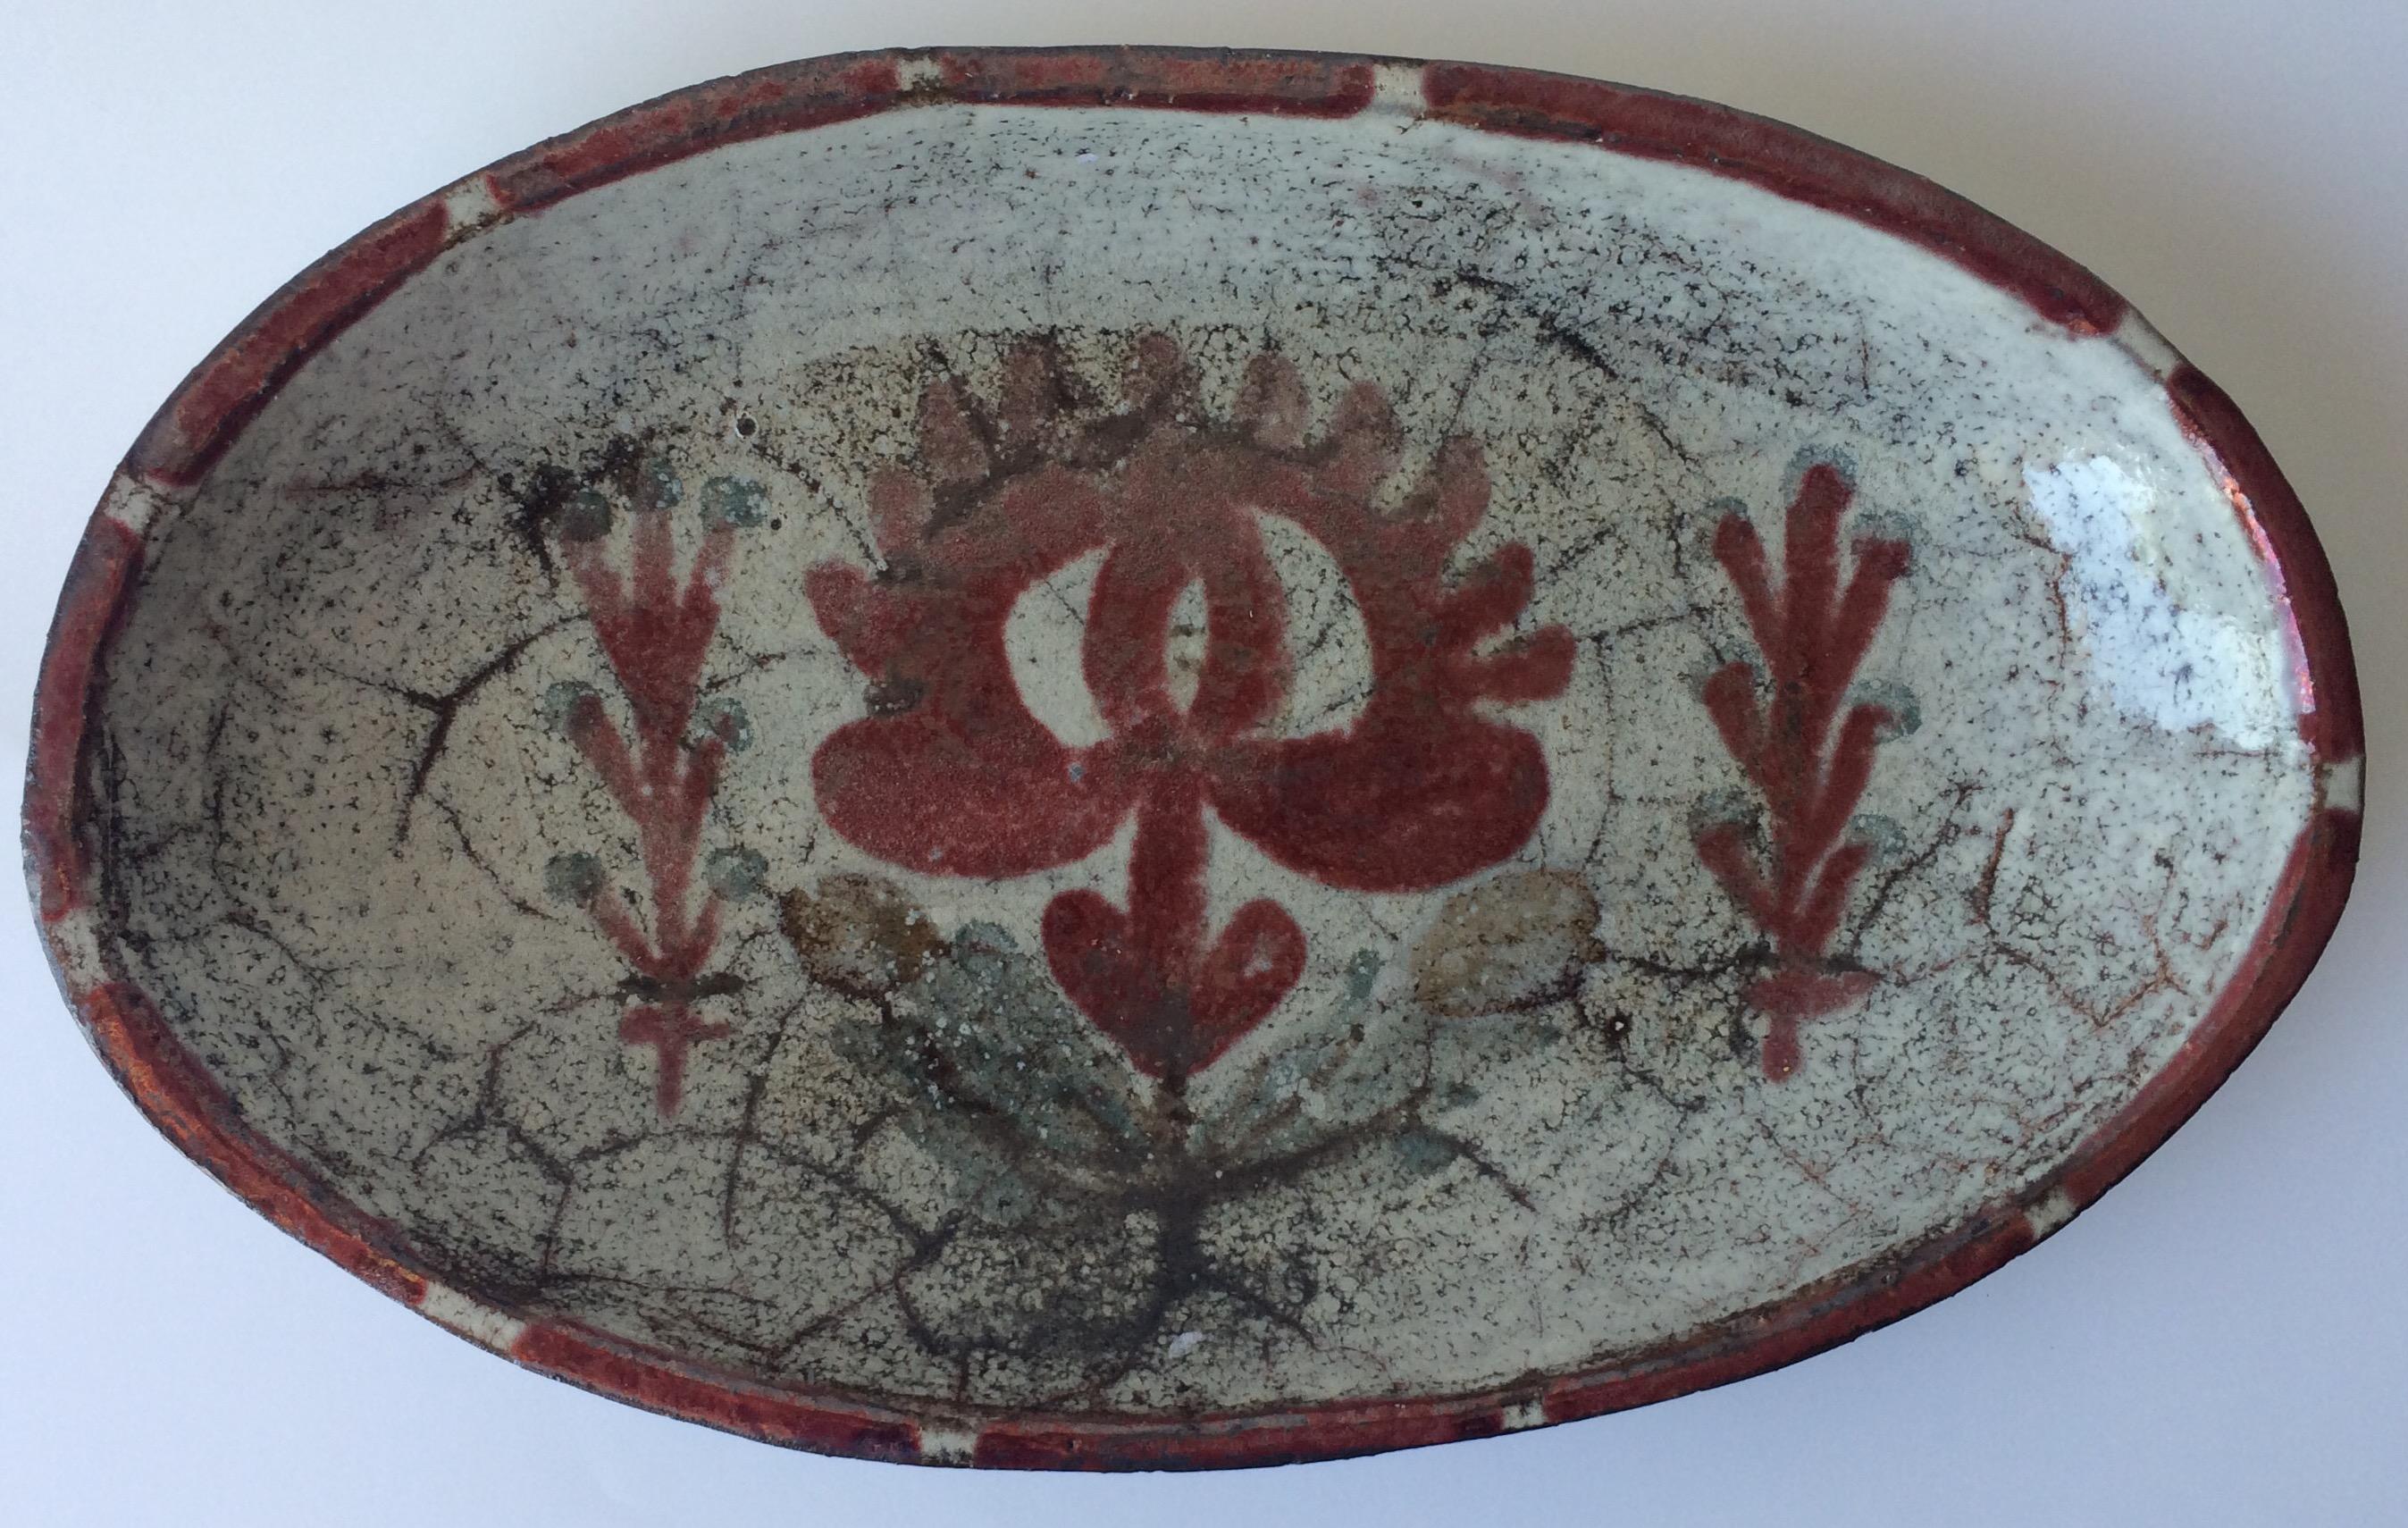 Beautiful midcentury handcrafted bowl by Gustave Reynaud for Atelier Le Murier.
Earthenware decorated with scarifications on gray enamel and red copper.
Wood firing.
Hand written signature under the base.
Wonderful form. 

Gustave Reynaud was Jean